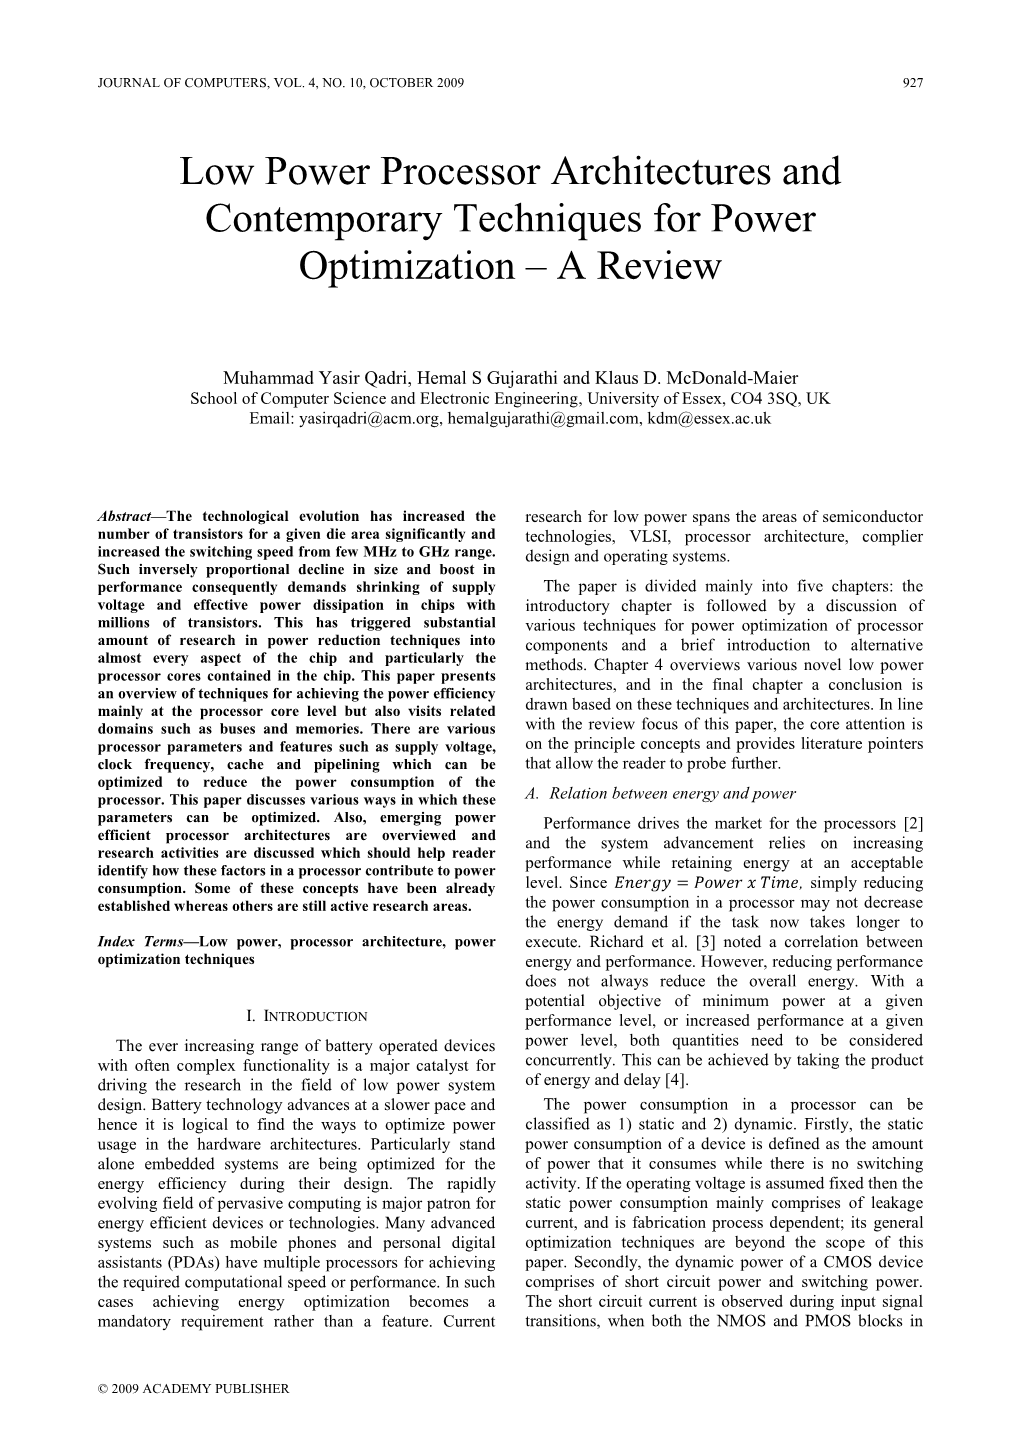 Low Power Processor Architectures and Contemporary Techniques for Power Optimization – a Review